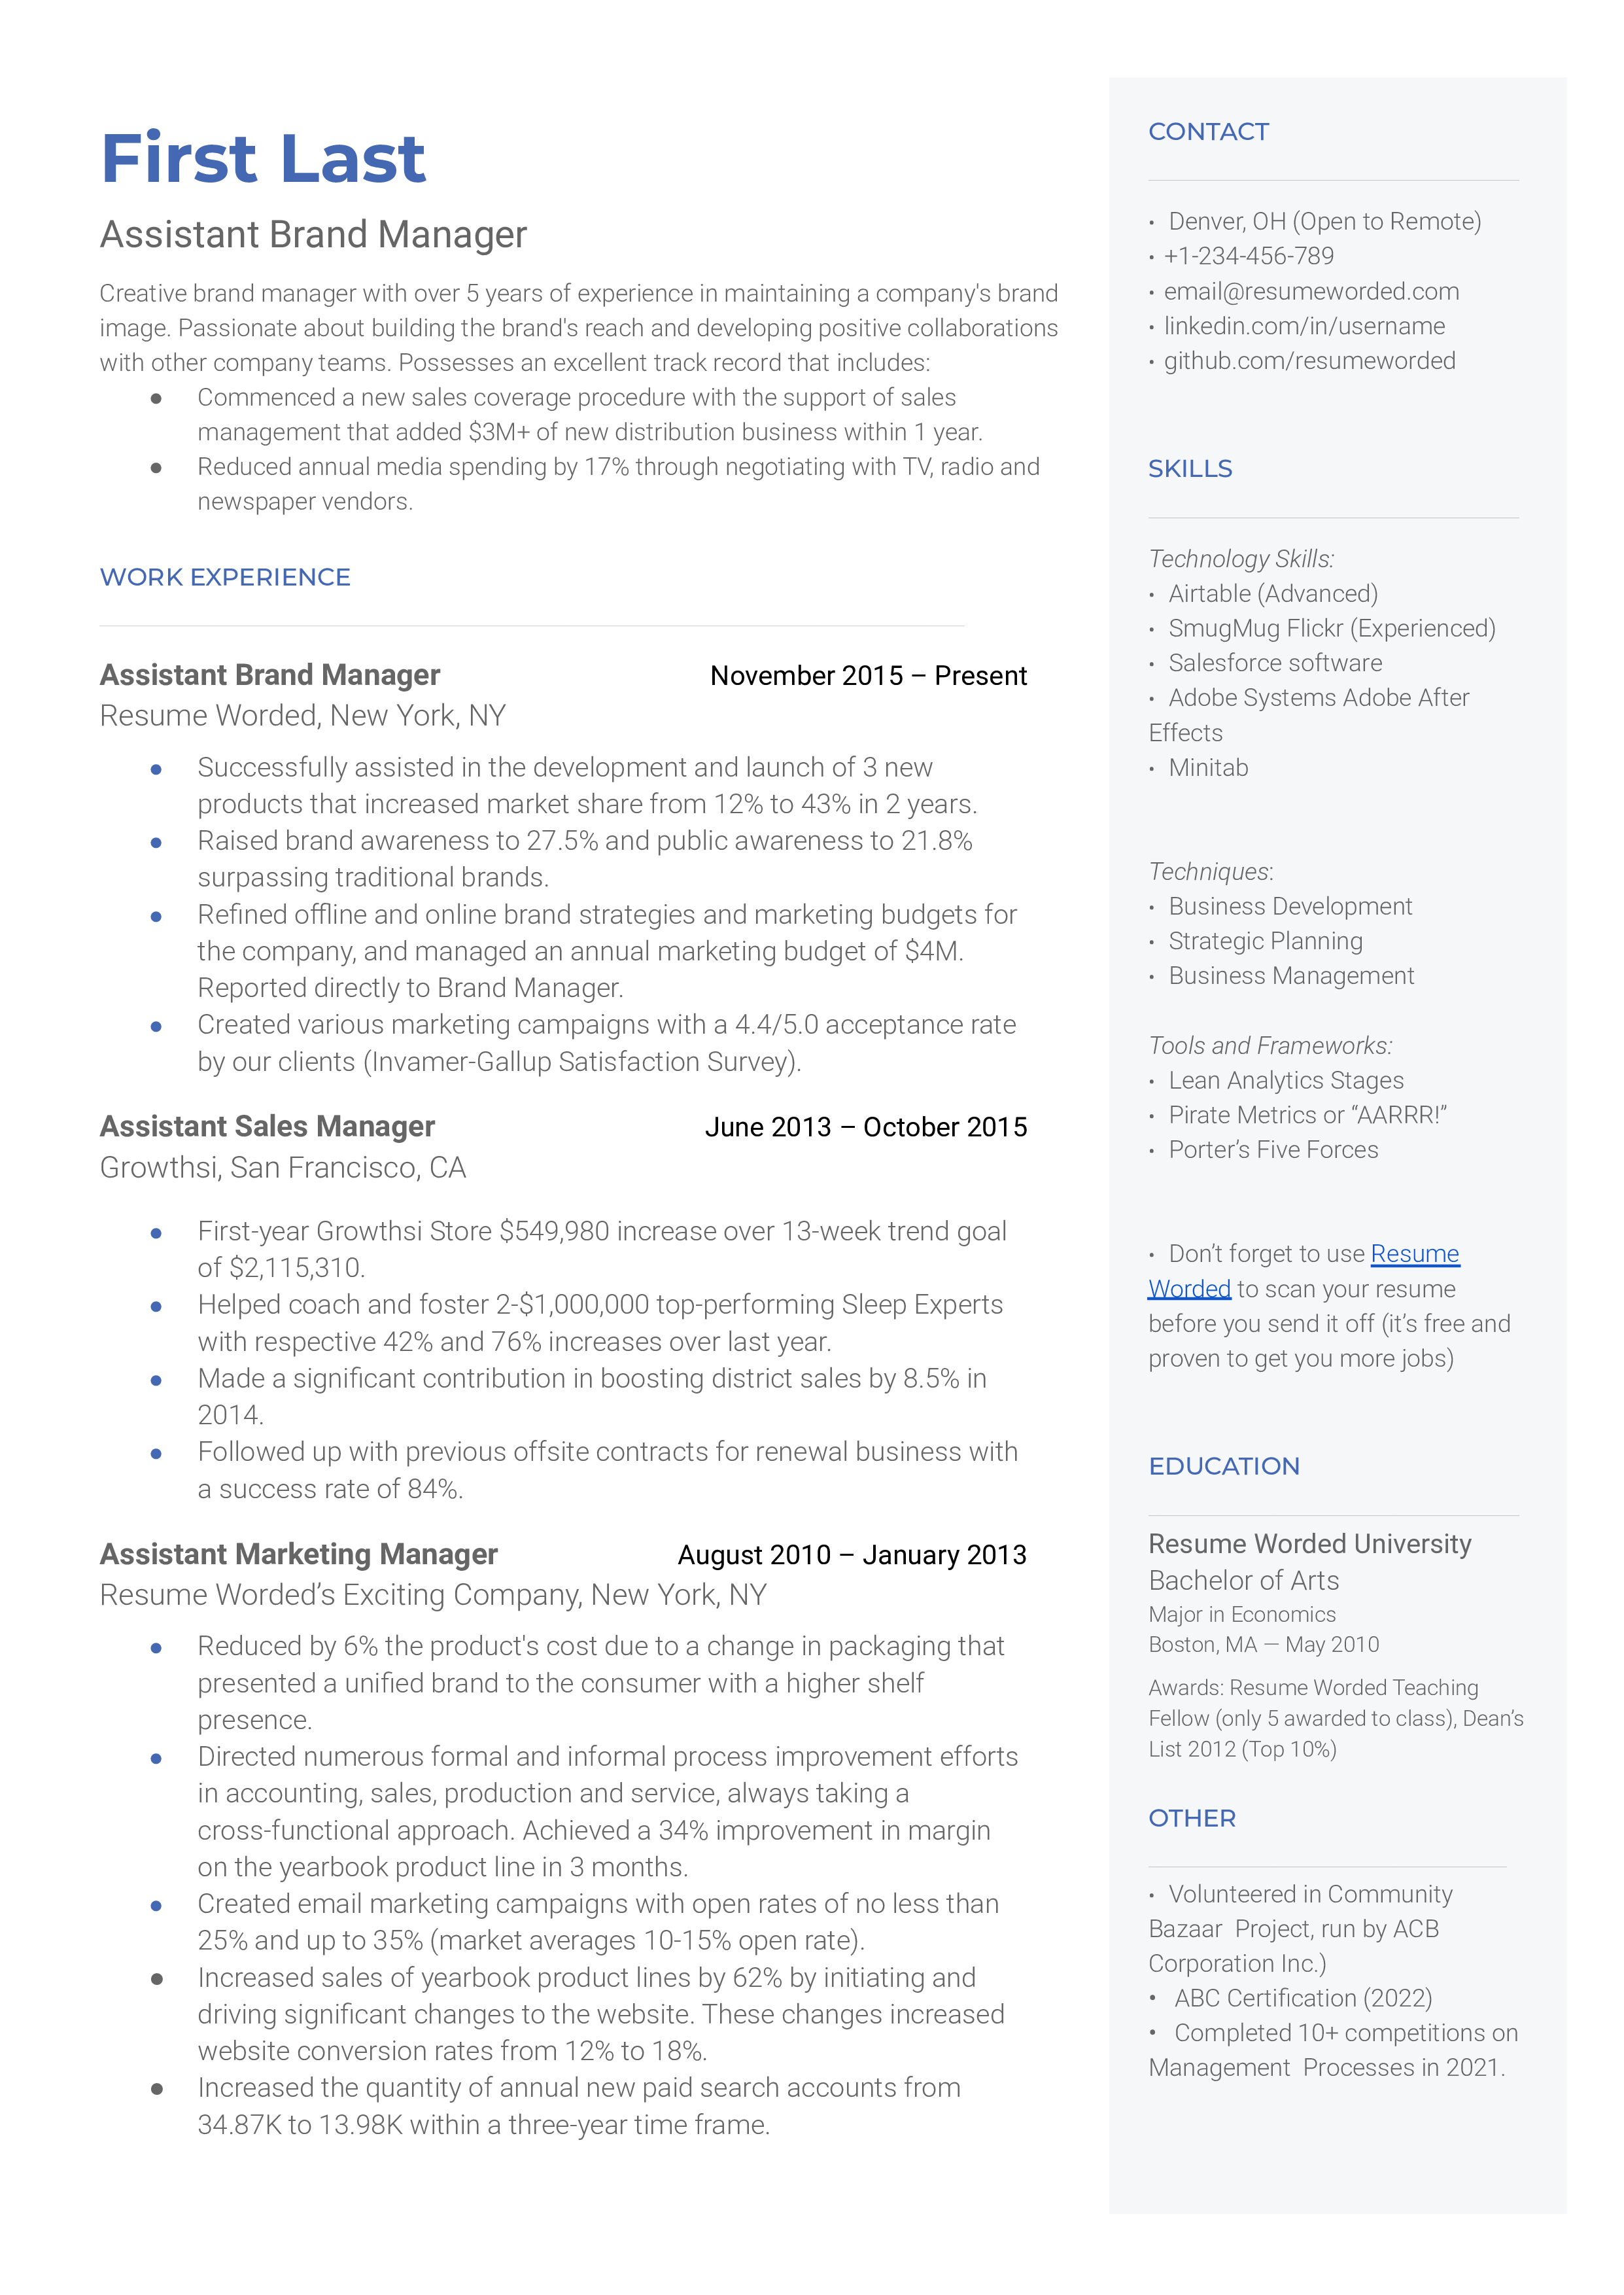 Assistant Brand Manager Resume Template + Example